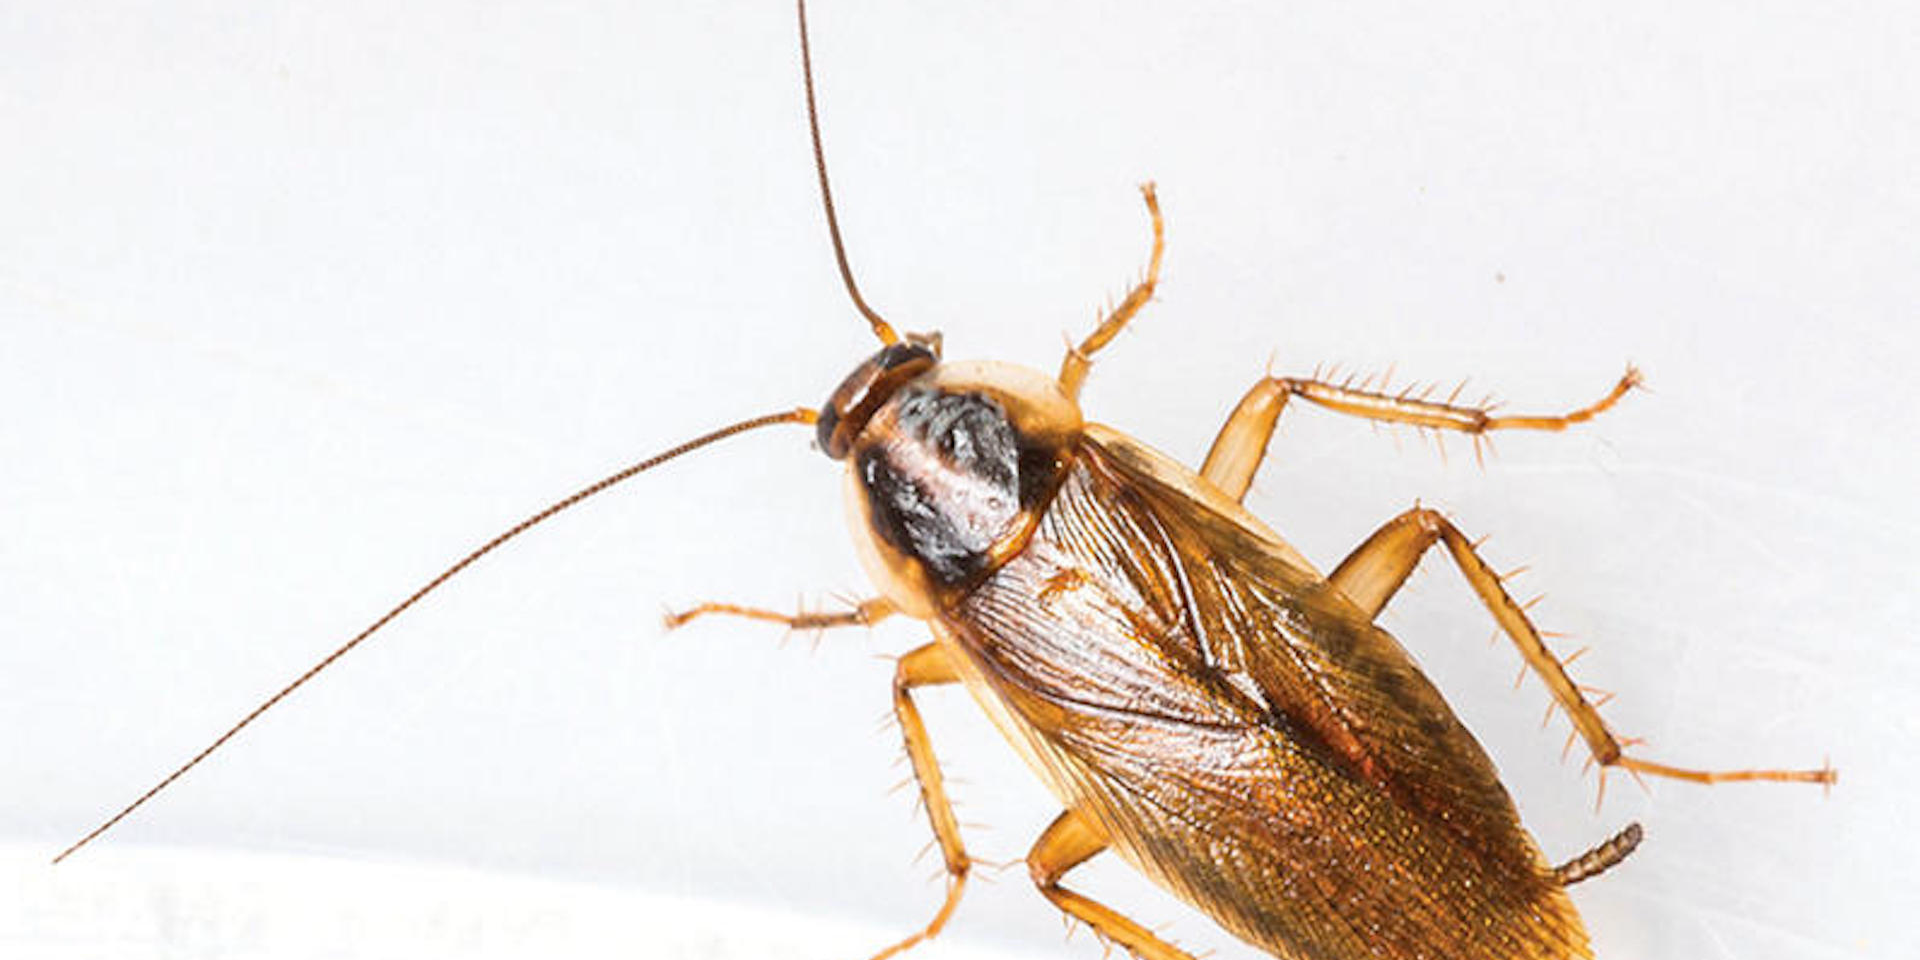 German cockroaches are filthy insects that are known to carry many different diseases